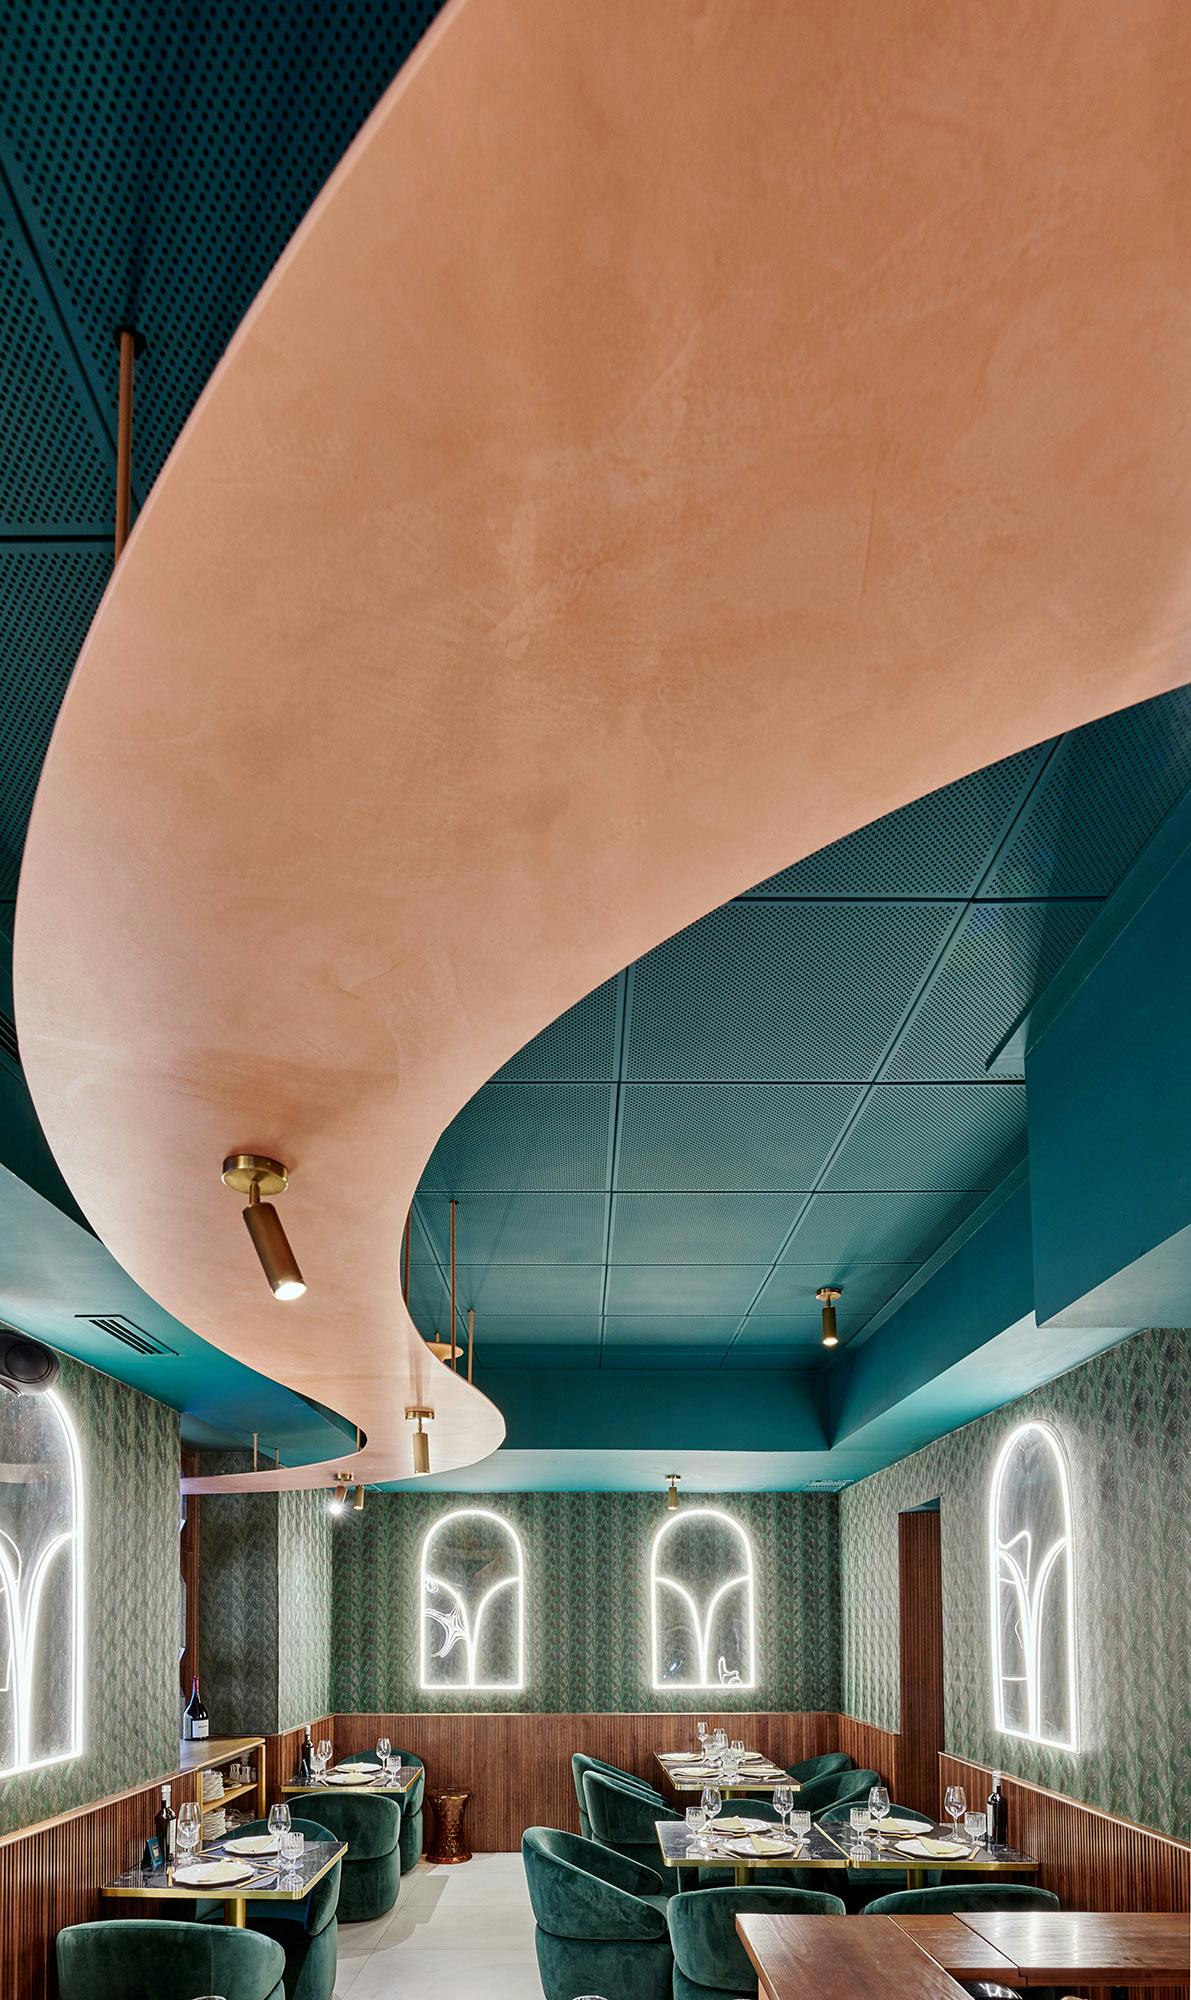 Numéro d'image 38 de la section actuelle de DKTN gives character to the bar and the organically shaped ceiling of this unique restaurant in Valencia de Cosentino France